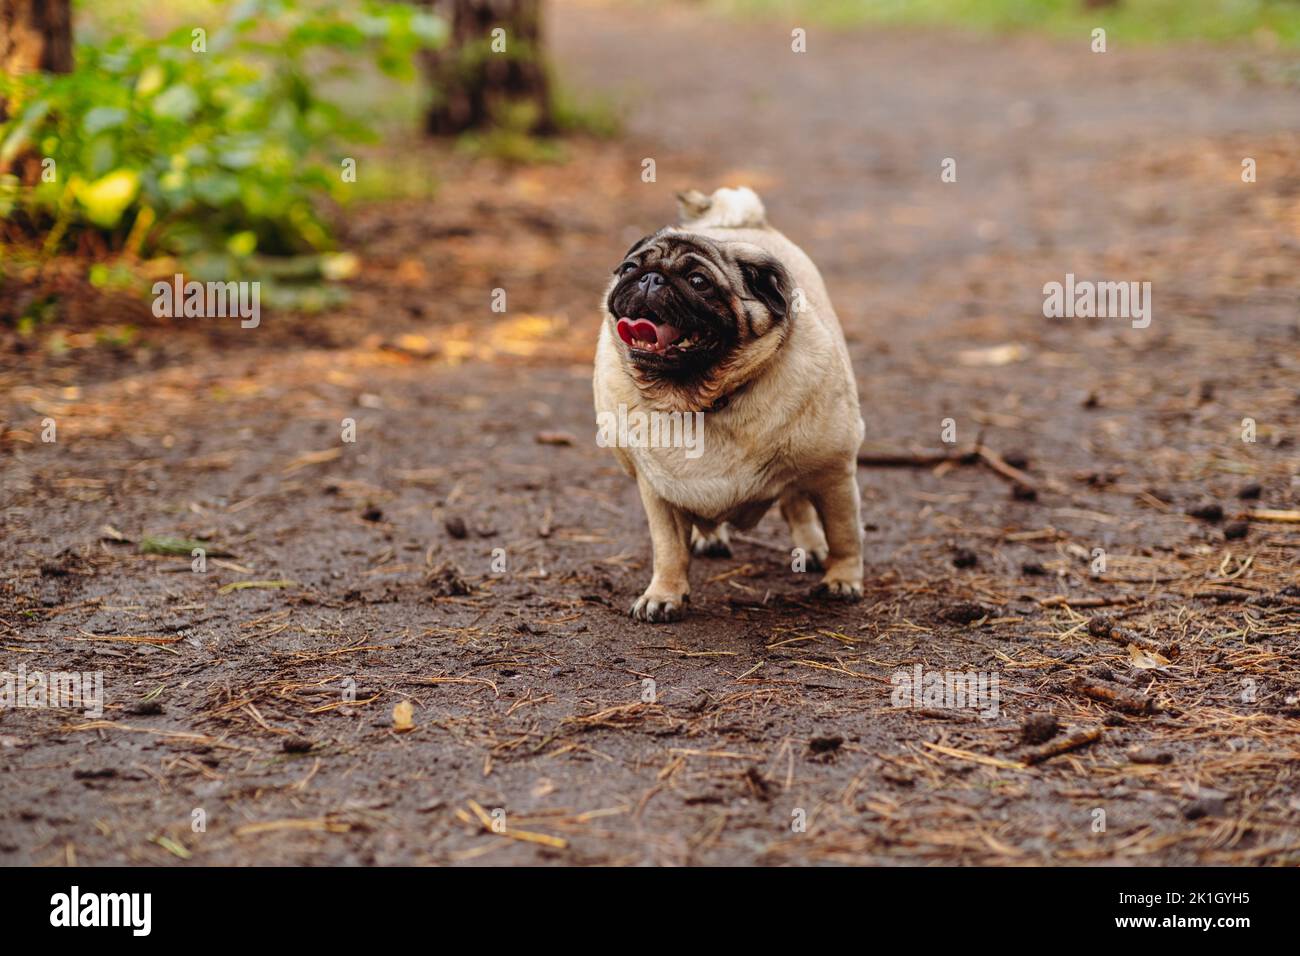 Pug dog with an open mouth and his tongue sticking out and standing on the trail in the park. Stock Photo